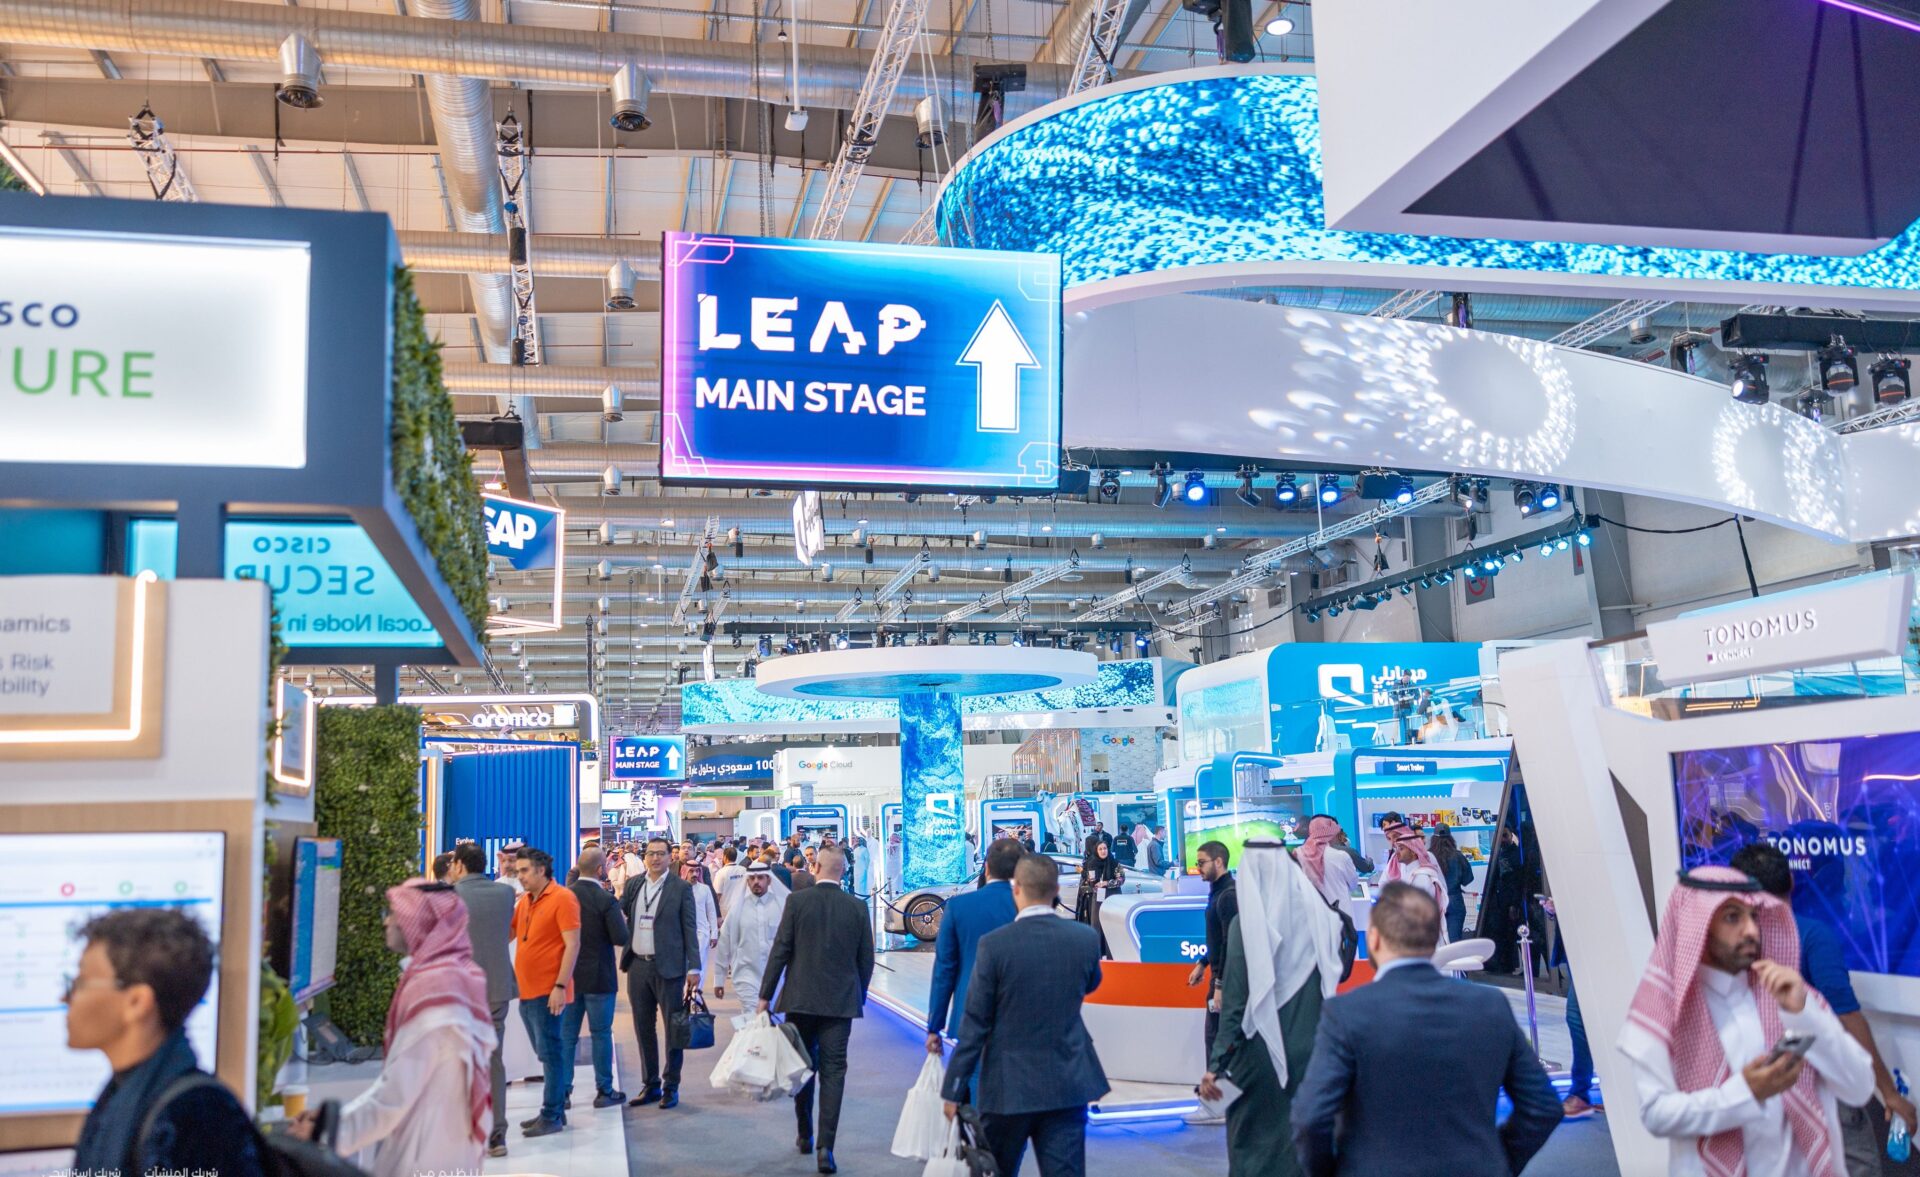 Crowds at LEAP24, the tech exhibition underway in Riyadh (Photo: LEAP)